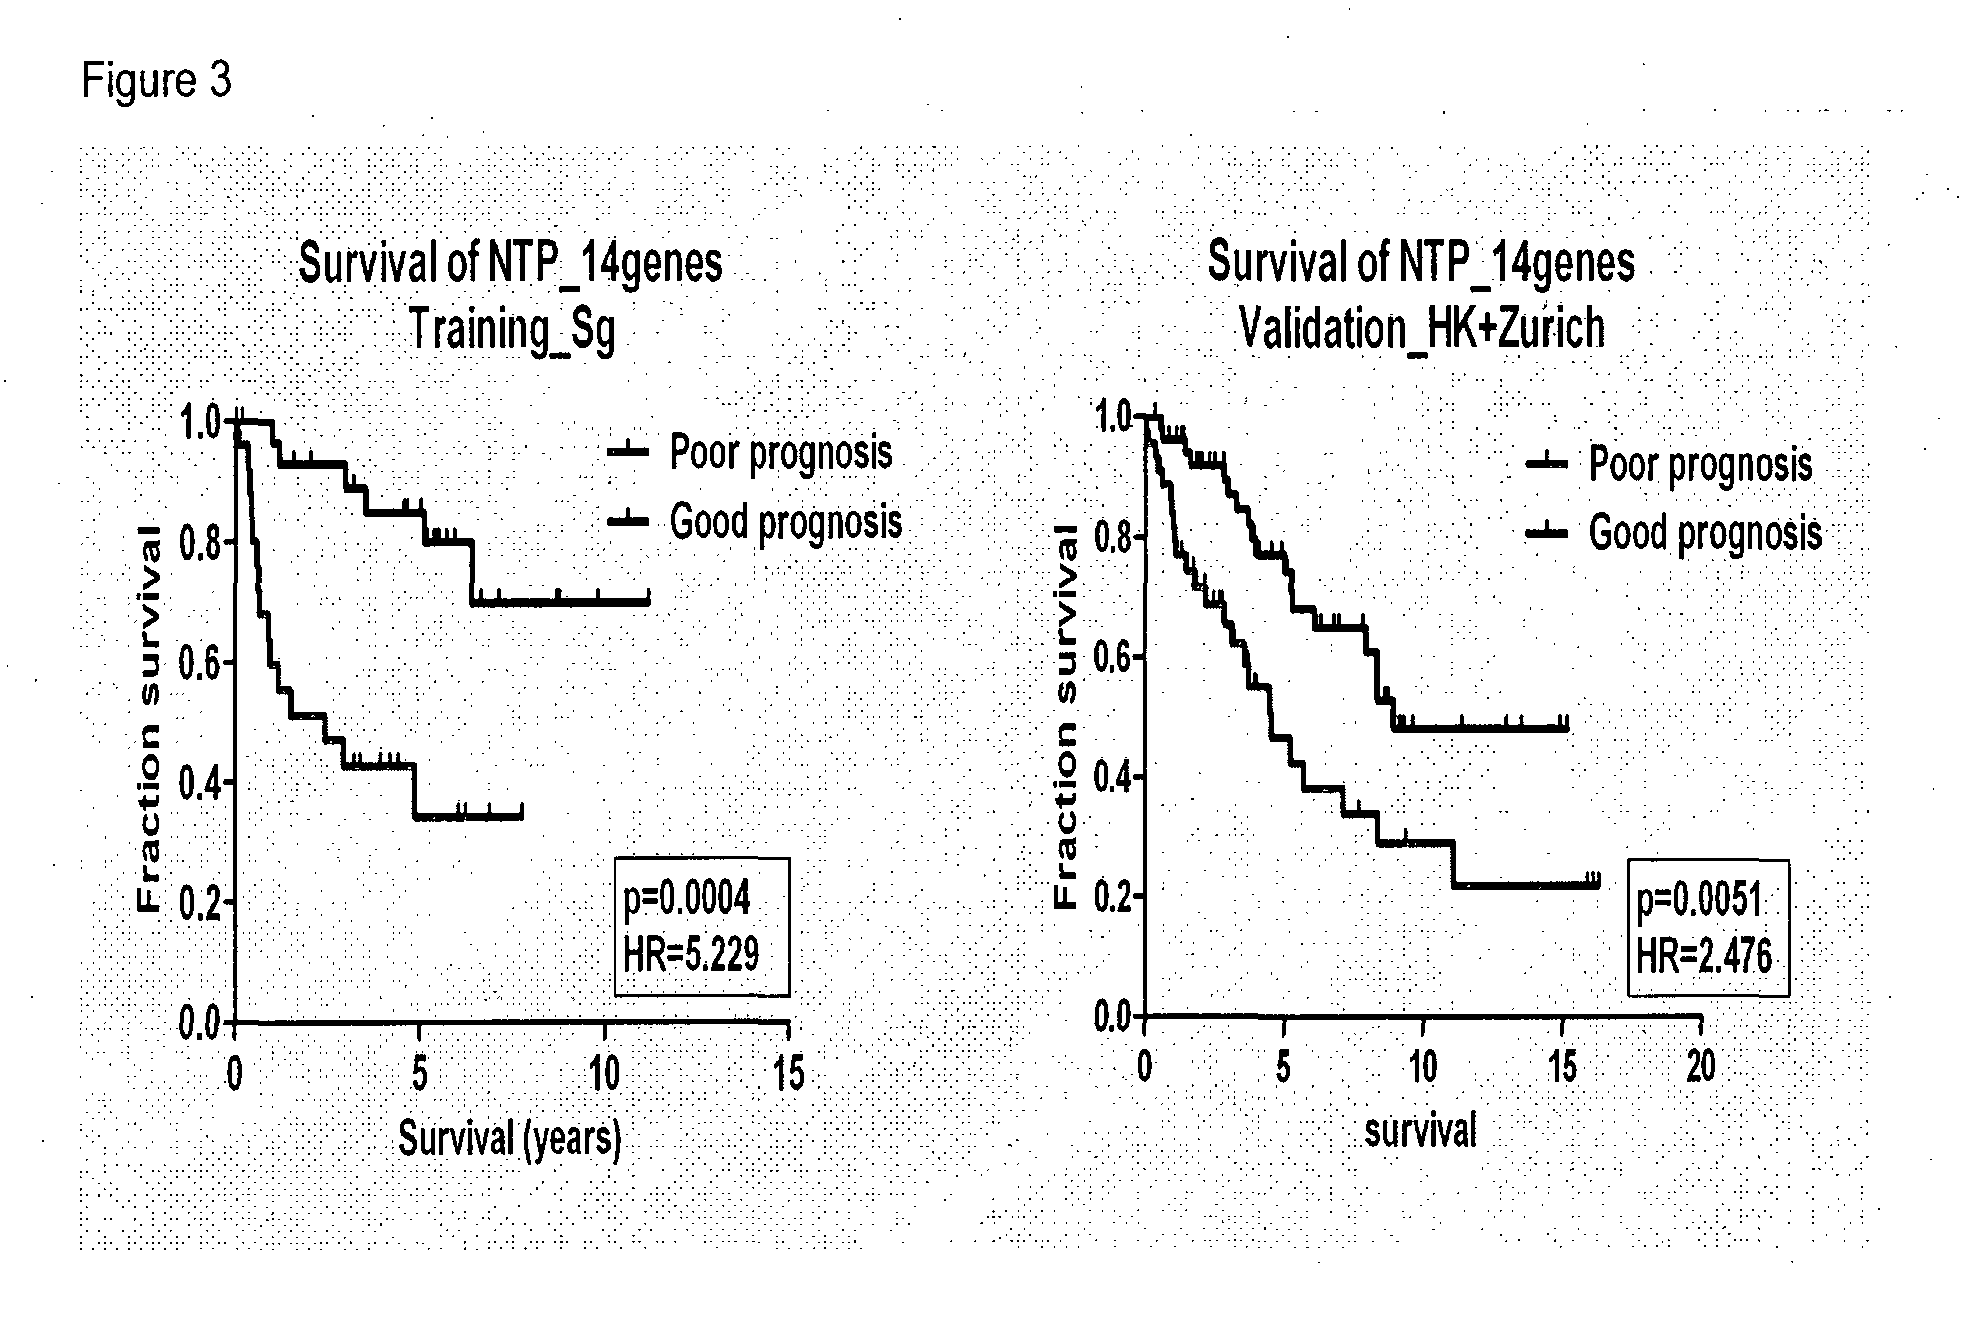 Gene signatures for use with hepatocellular carcinoma